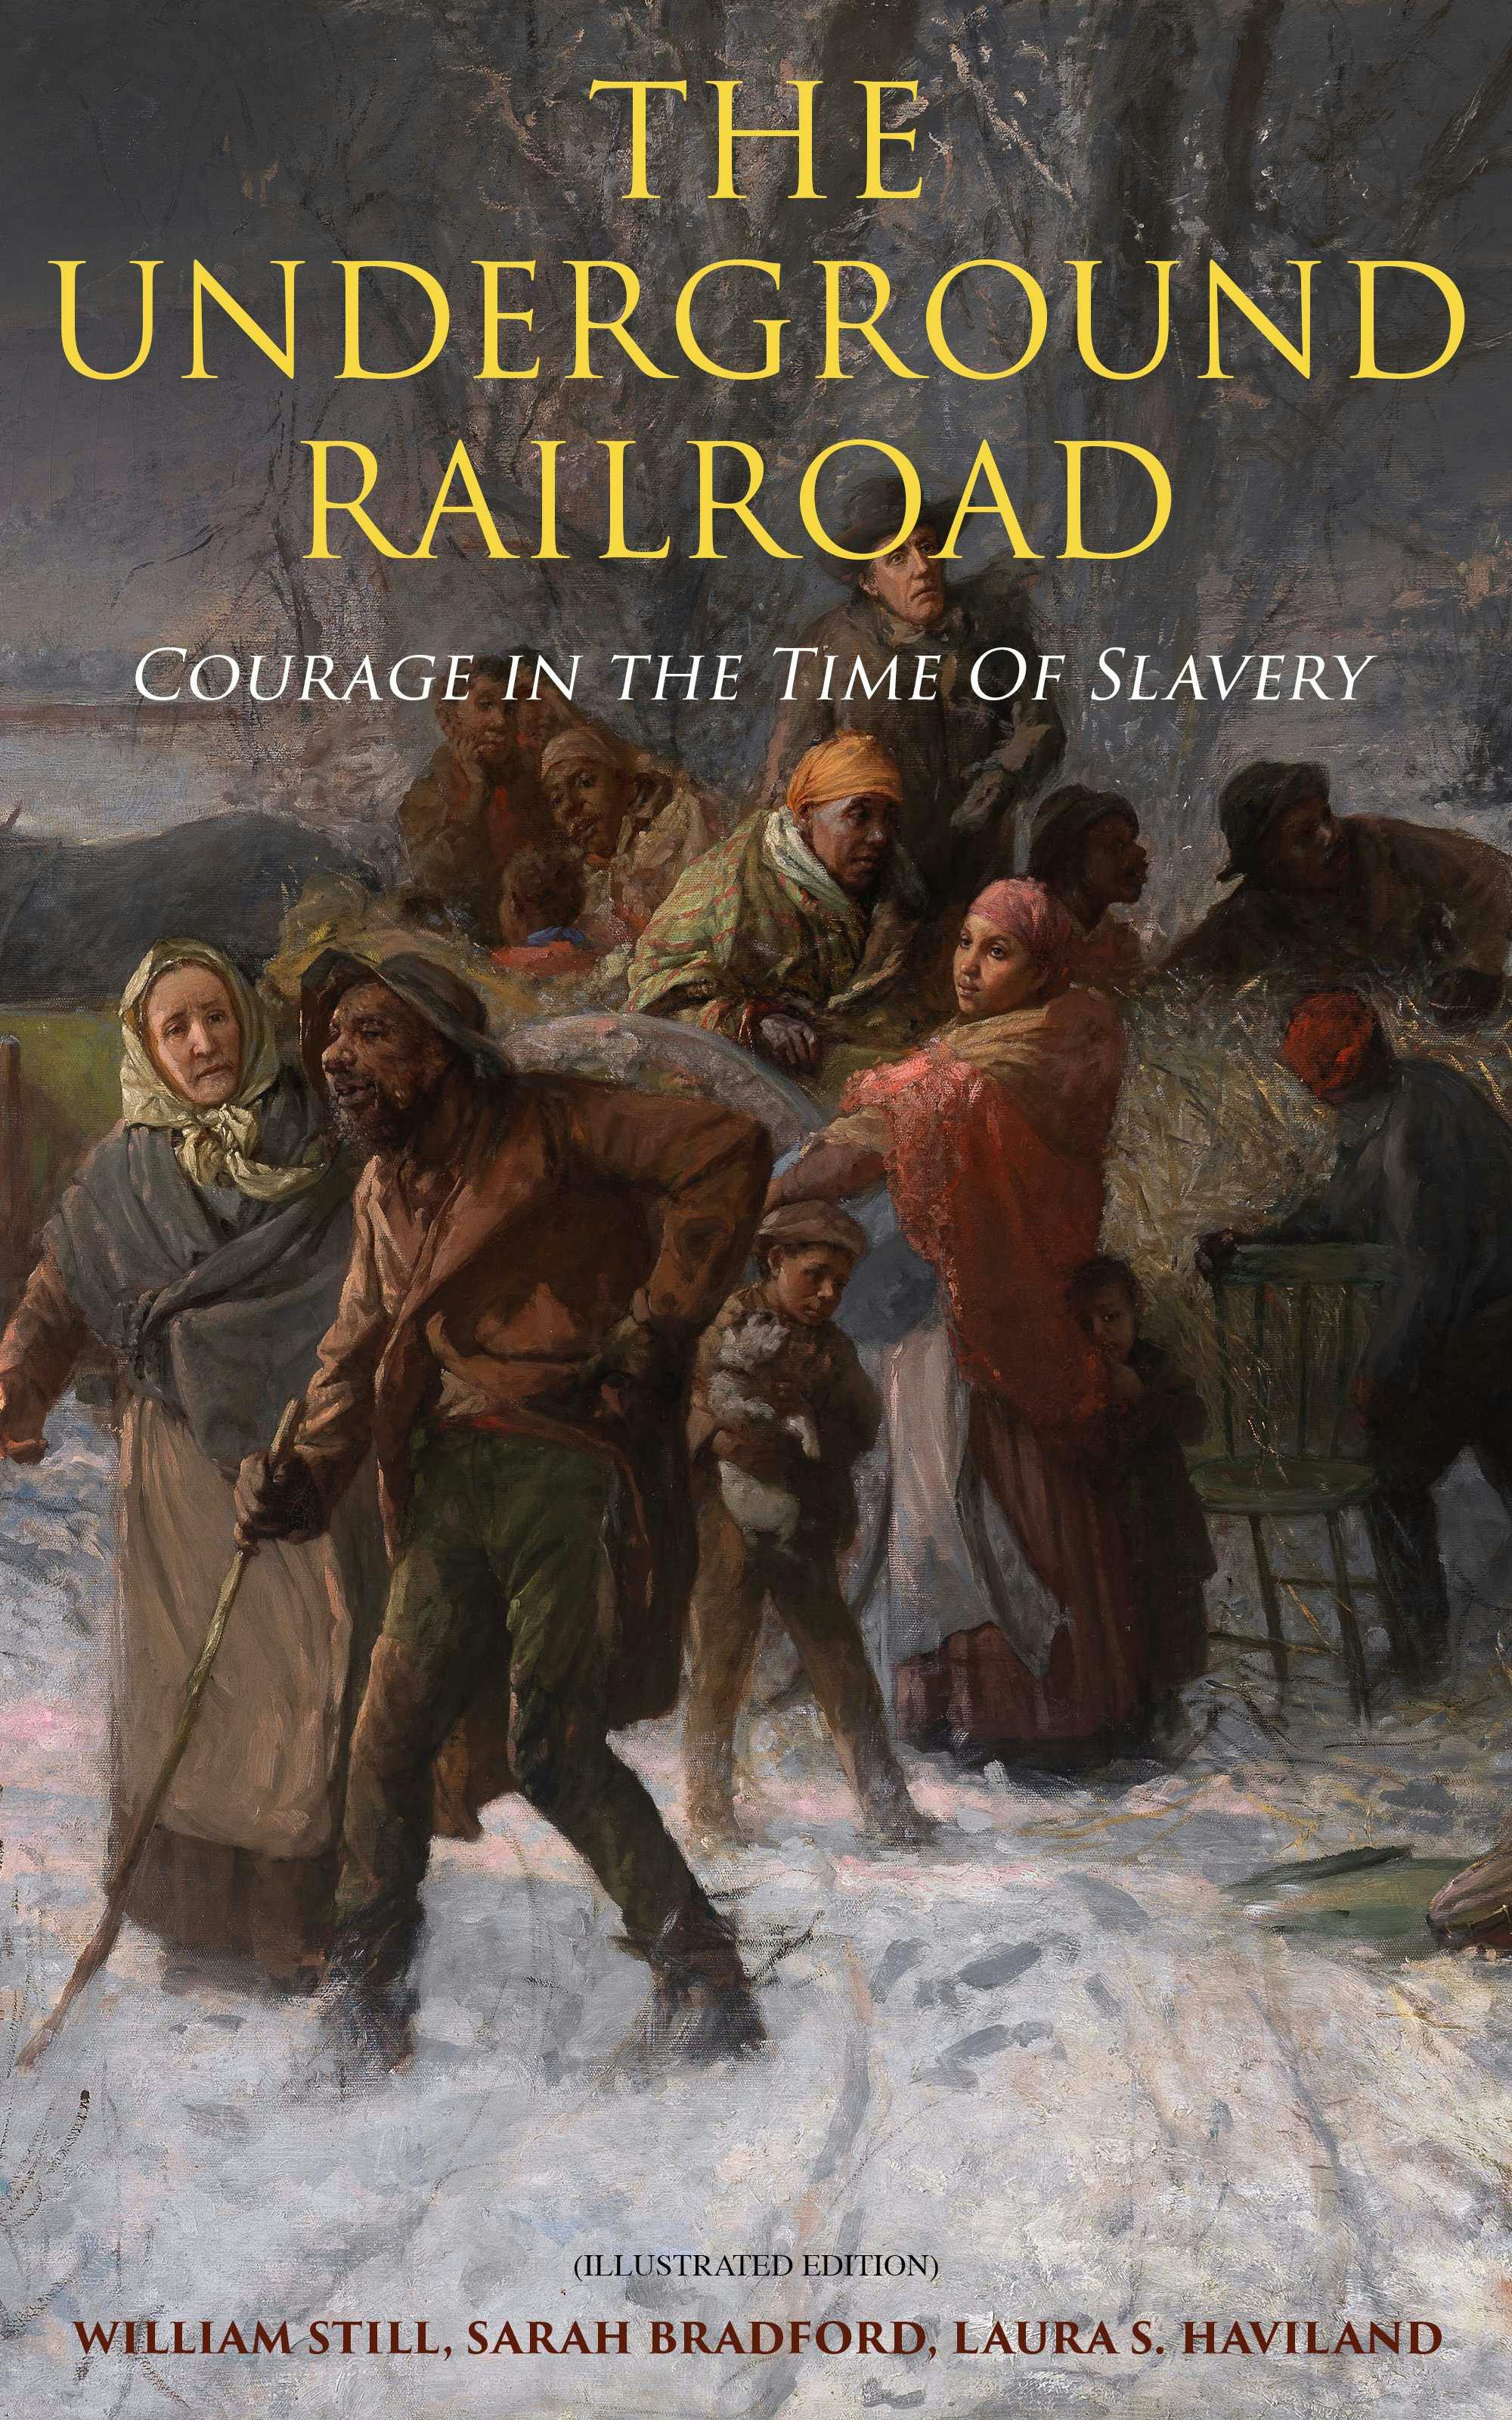 The Underground Railroad - Courage in the Time Of Slavery (Illustrated Edition): Real Life Stories, Escapes, Bravery and Struggles - William Still, Sarah Bradford, Laura S. Haviland